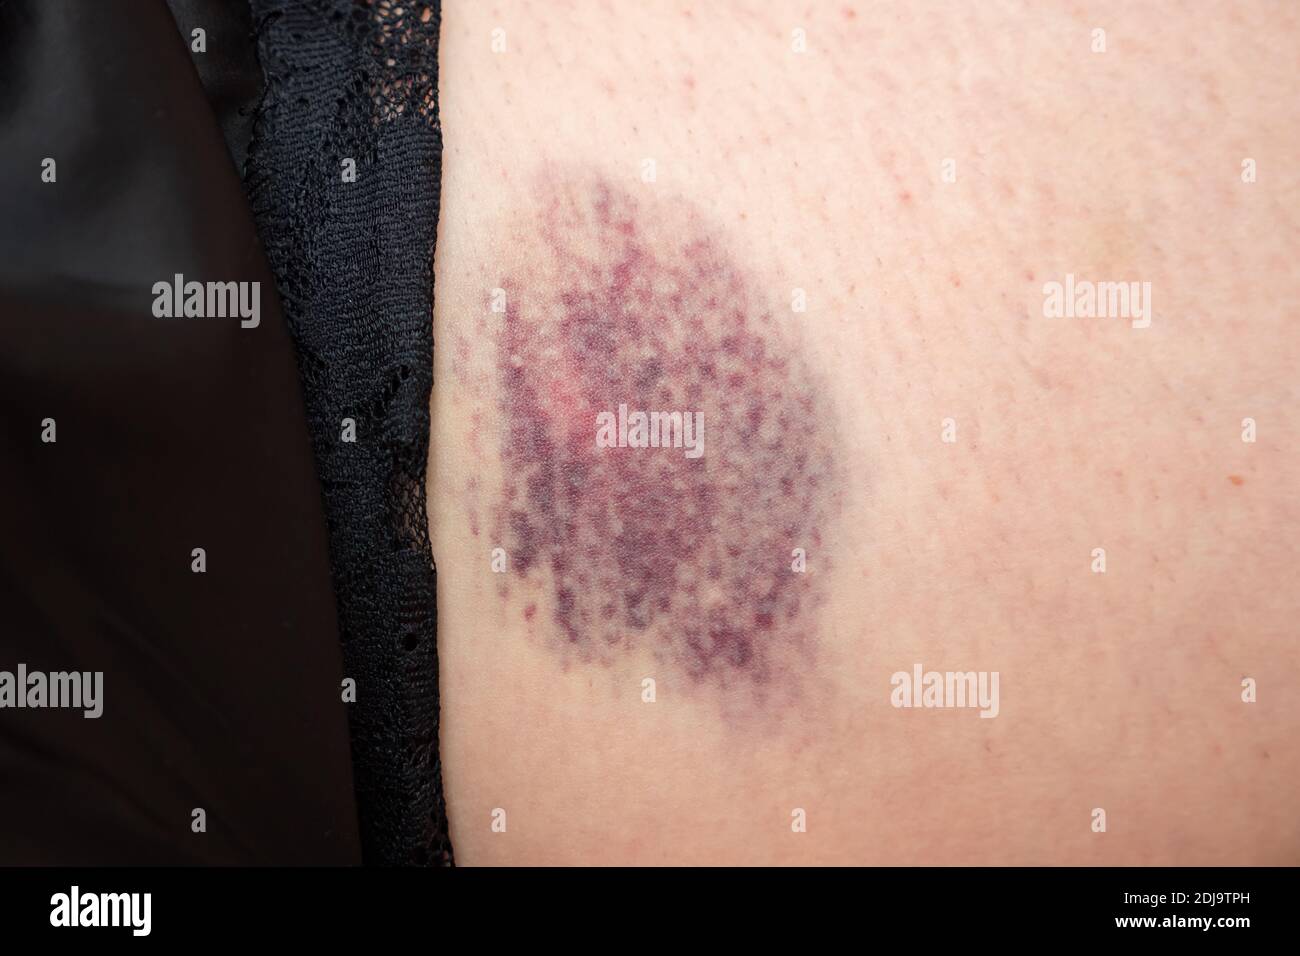 blue and pink bruise on female thigh close-up Stock Photo